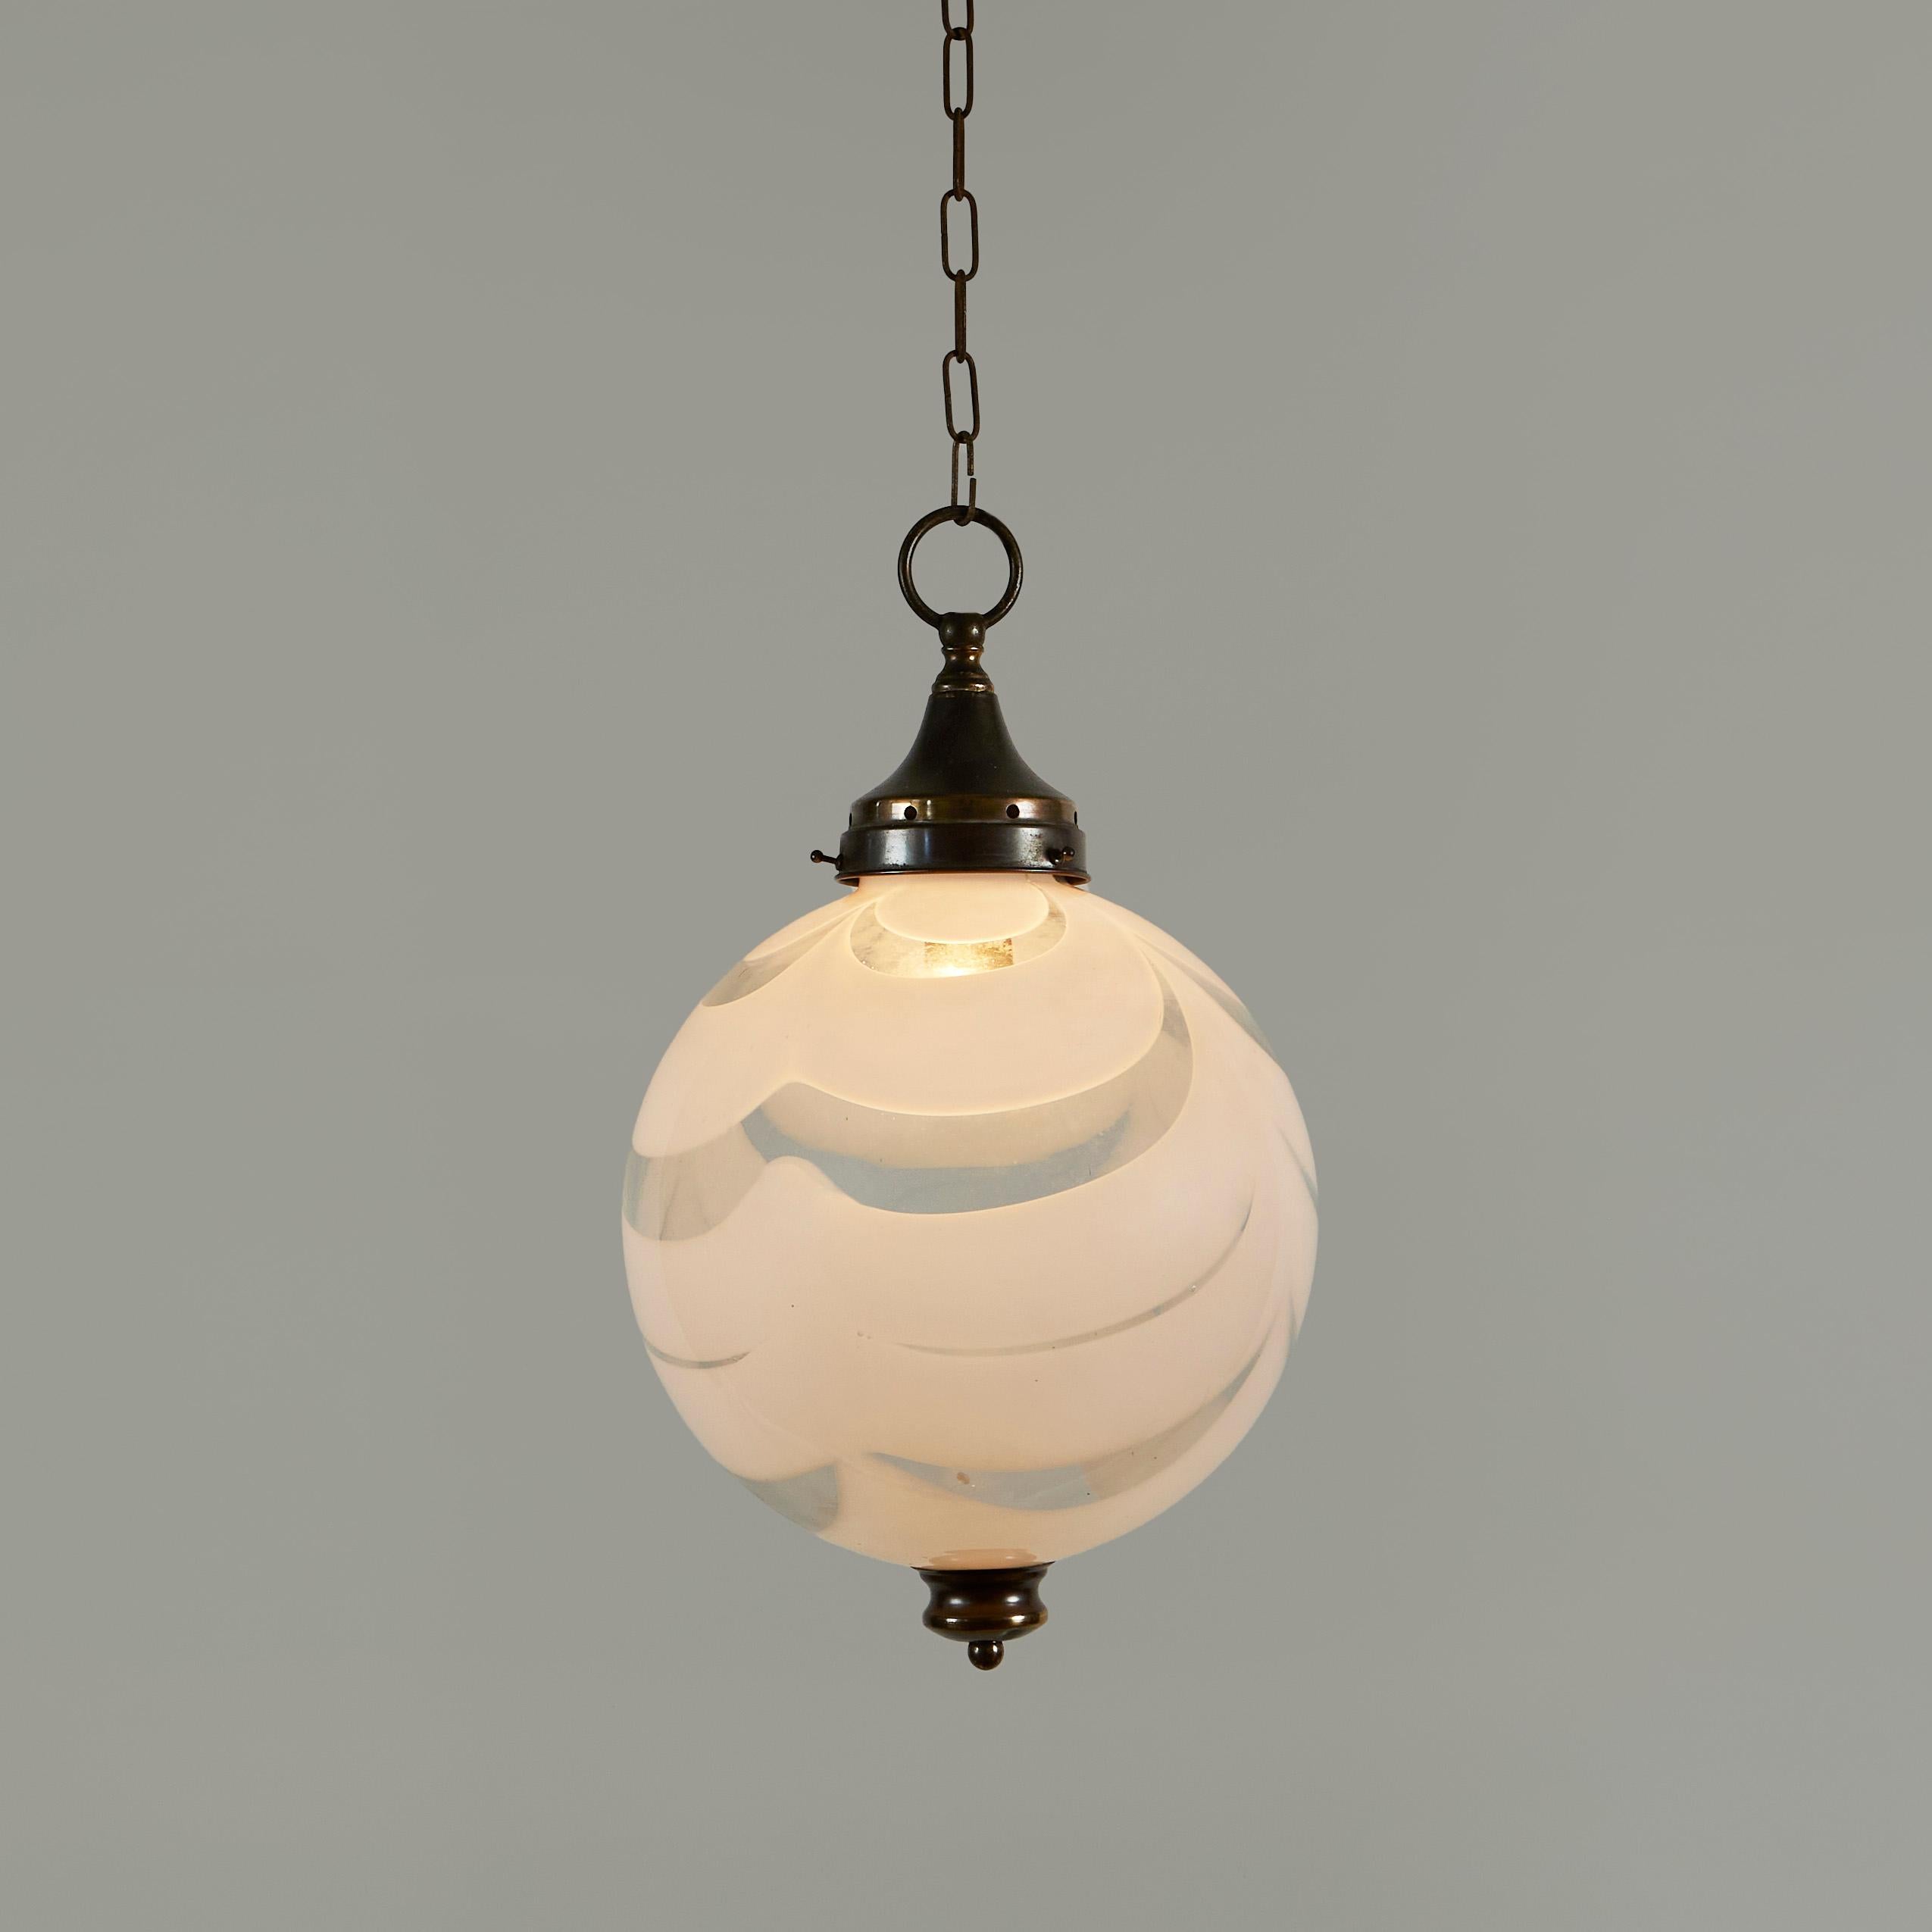 Murano handblown glass sphere pendant of transparent glass heavily patterned with thick swirls in white. Decorative brass fitting and ceiling rose.